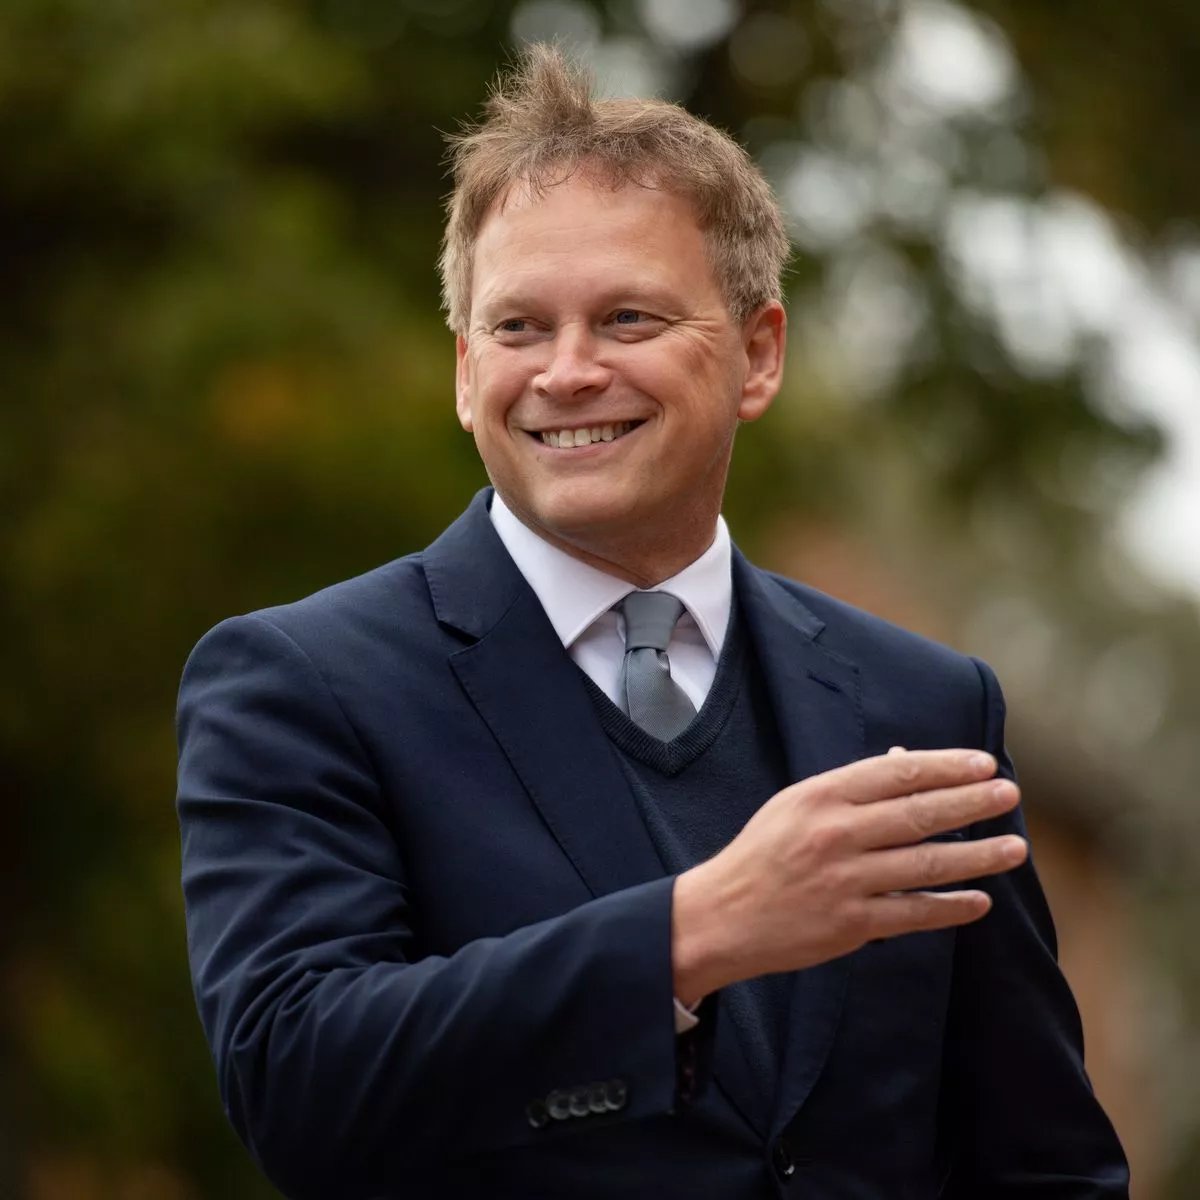 So Shapps is considering mothballing the ships of The Royal Marines, an elite fighting unit dating back to 1664, saying they aren't needed. Yet he is more than happy for the Royal Navy to be engaging in warfare in the Red Sea on behalf of Israel. Once upon a time this would…